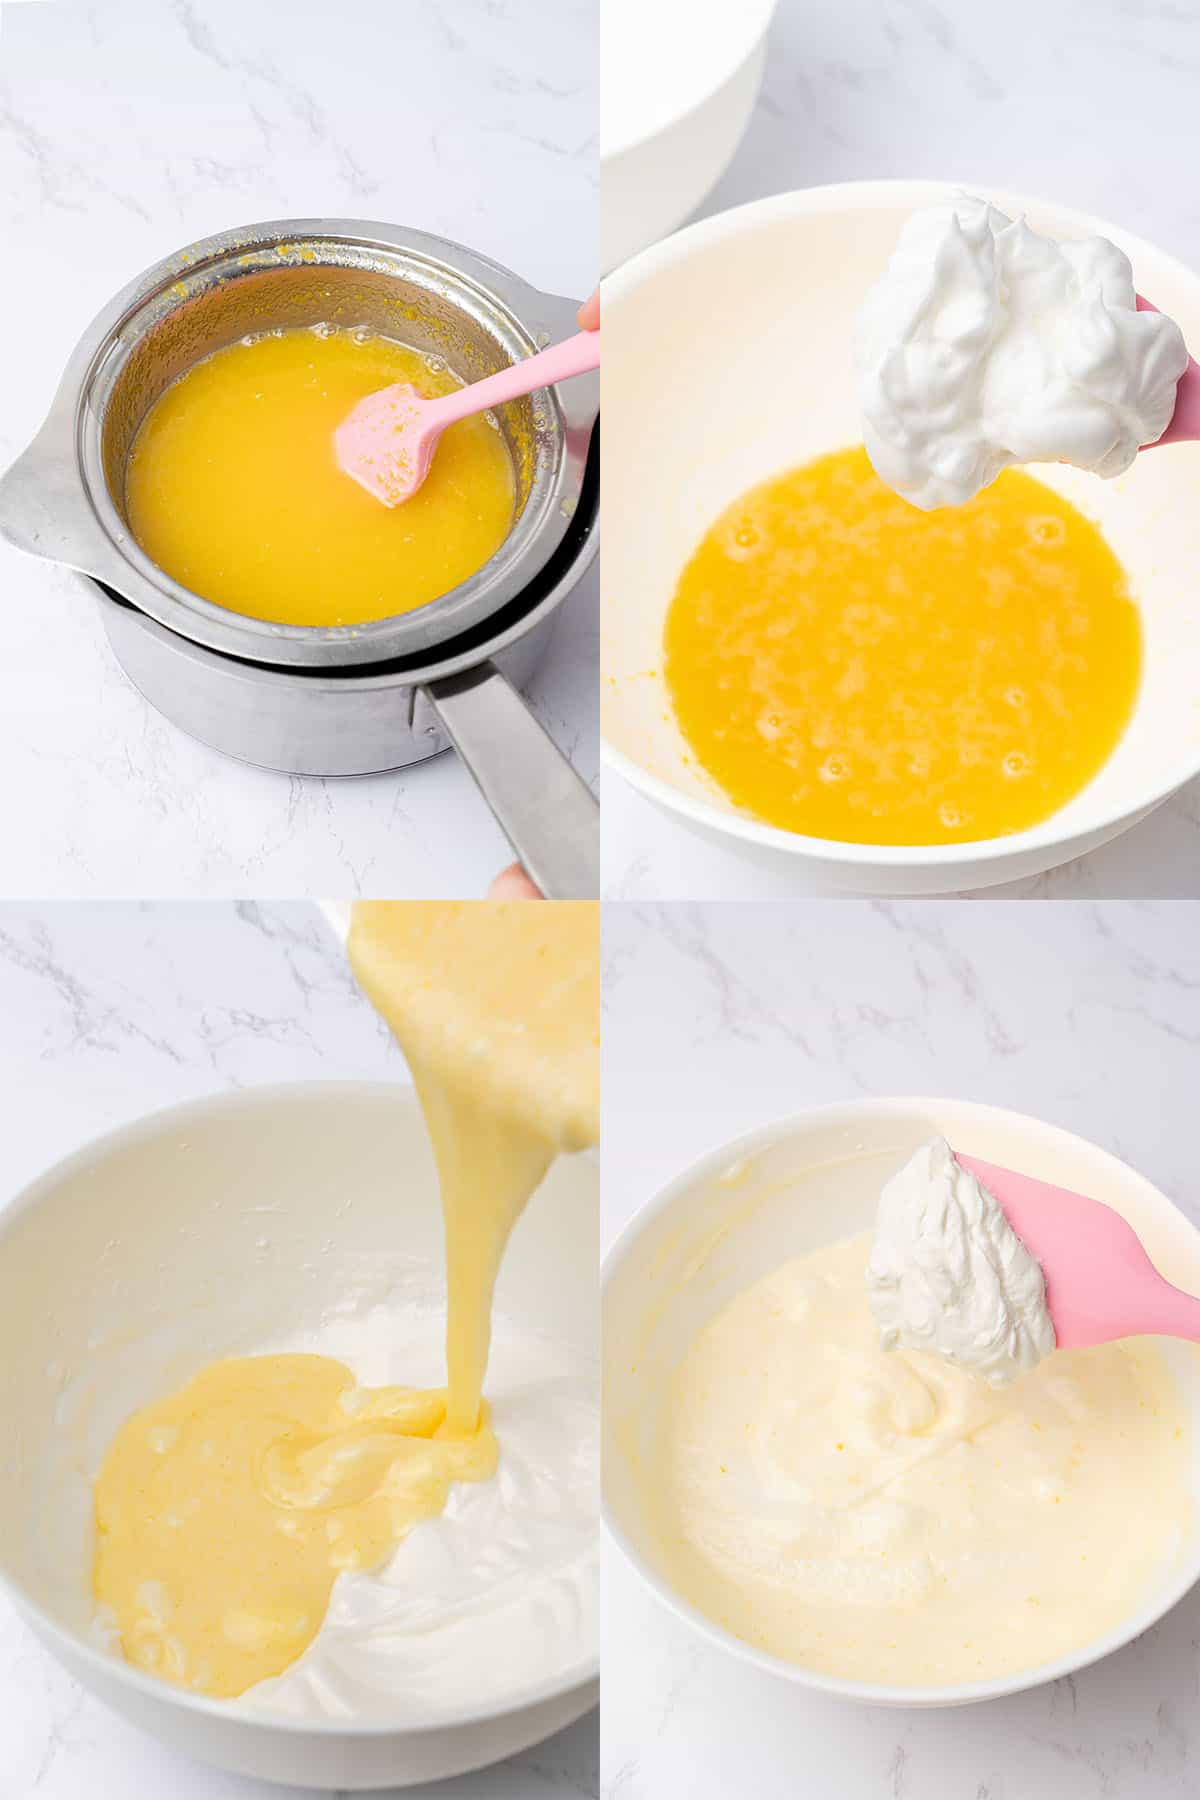 White Chocolate mousse process.